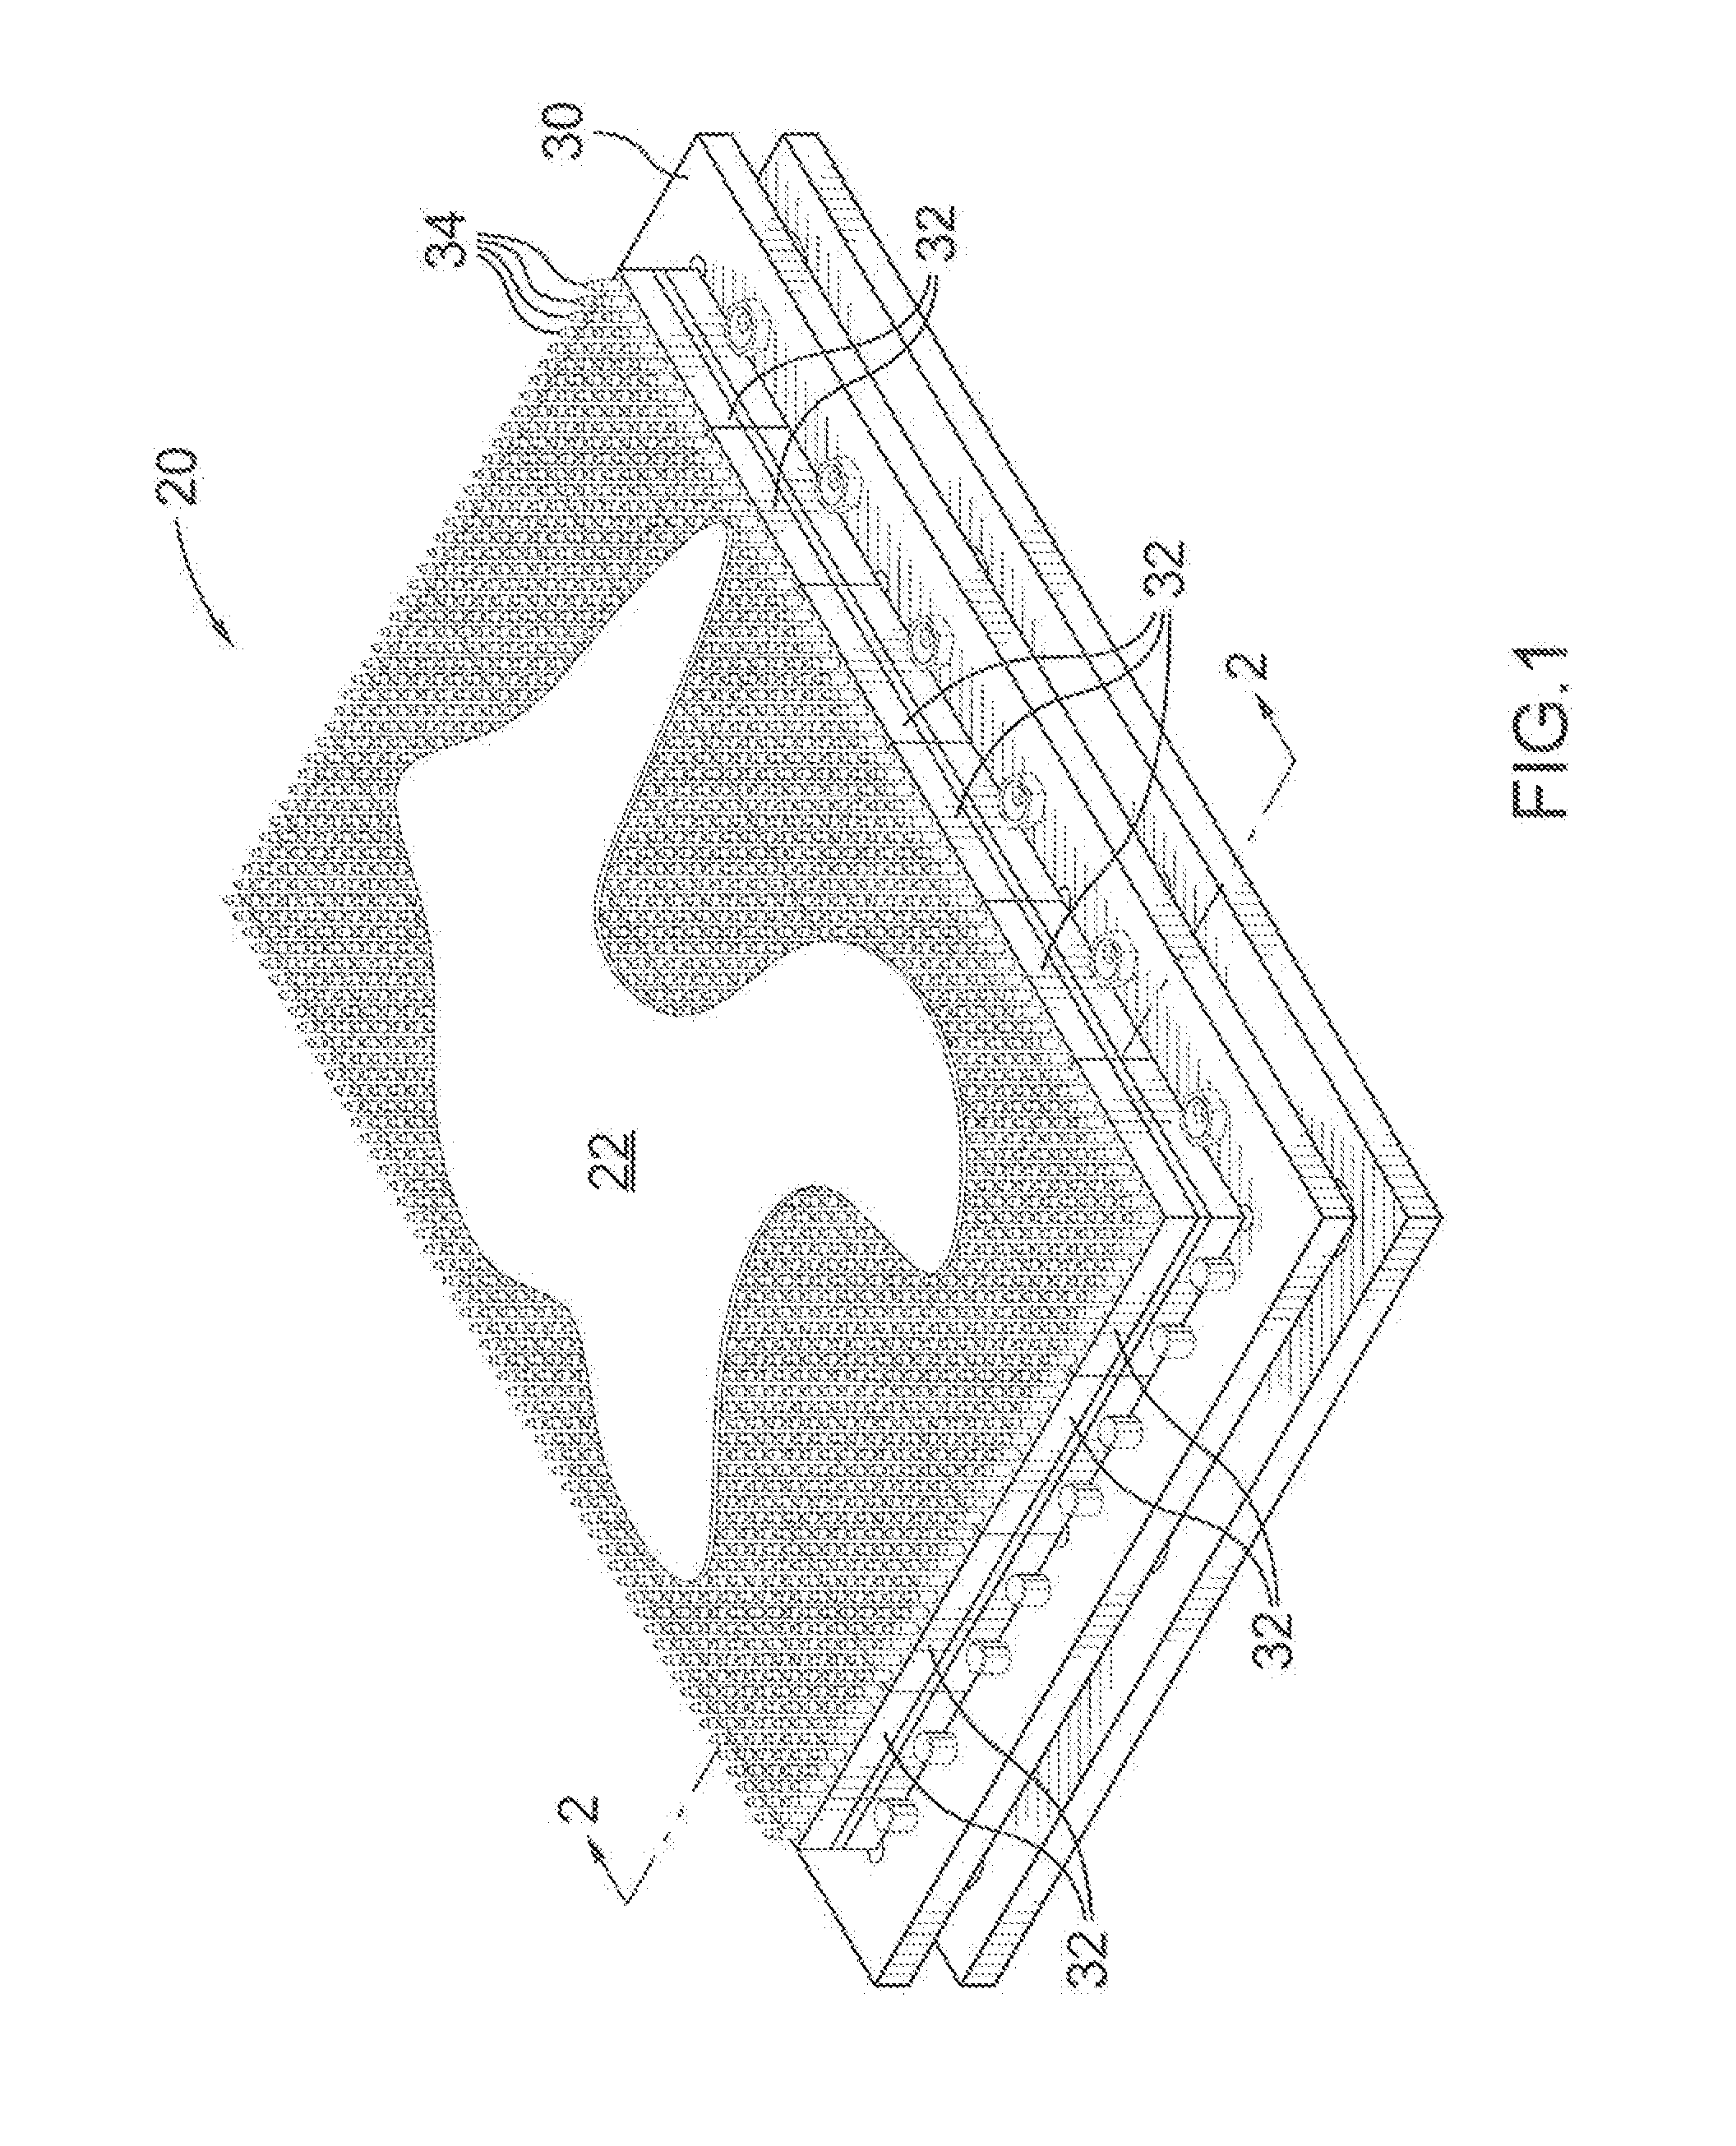 Apparatus and Methods for Perforating Leather Using Perforation Tiles